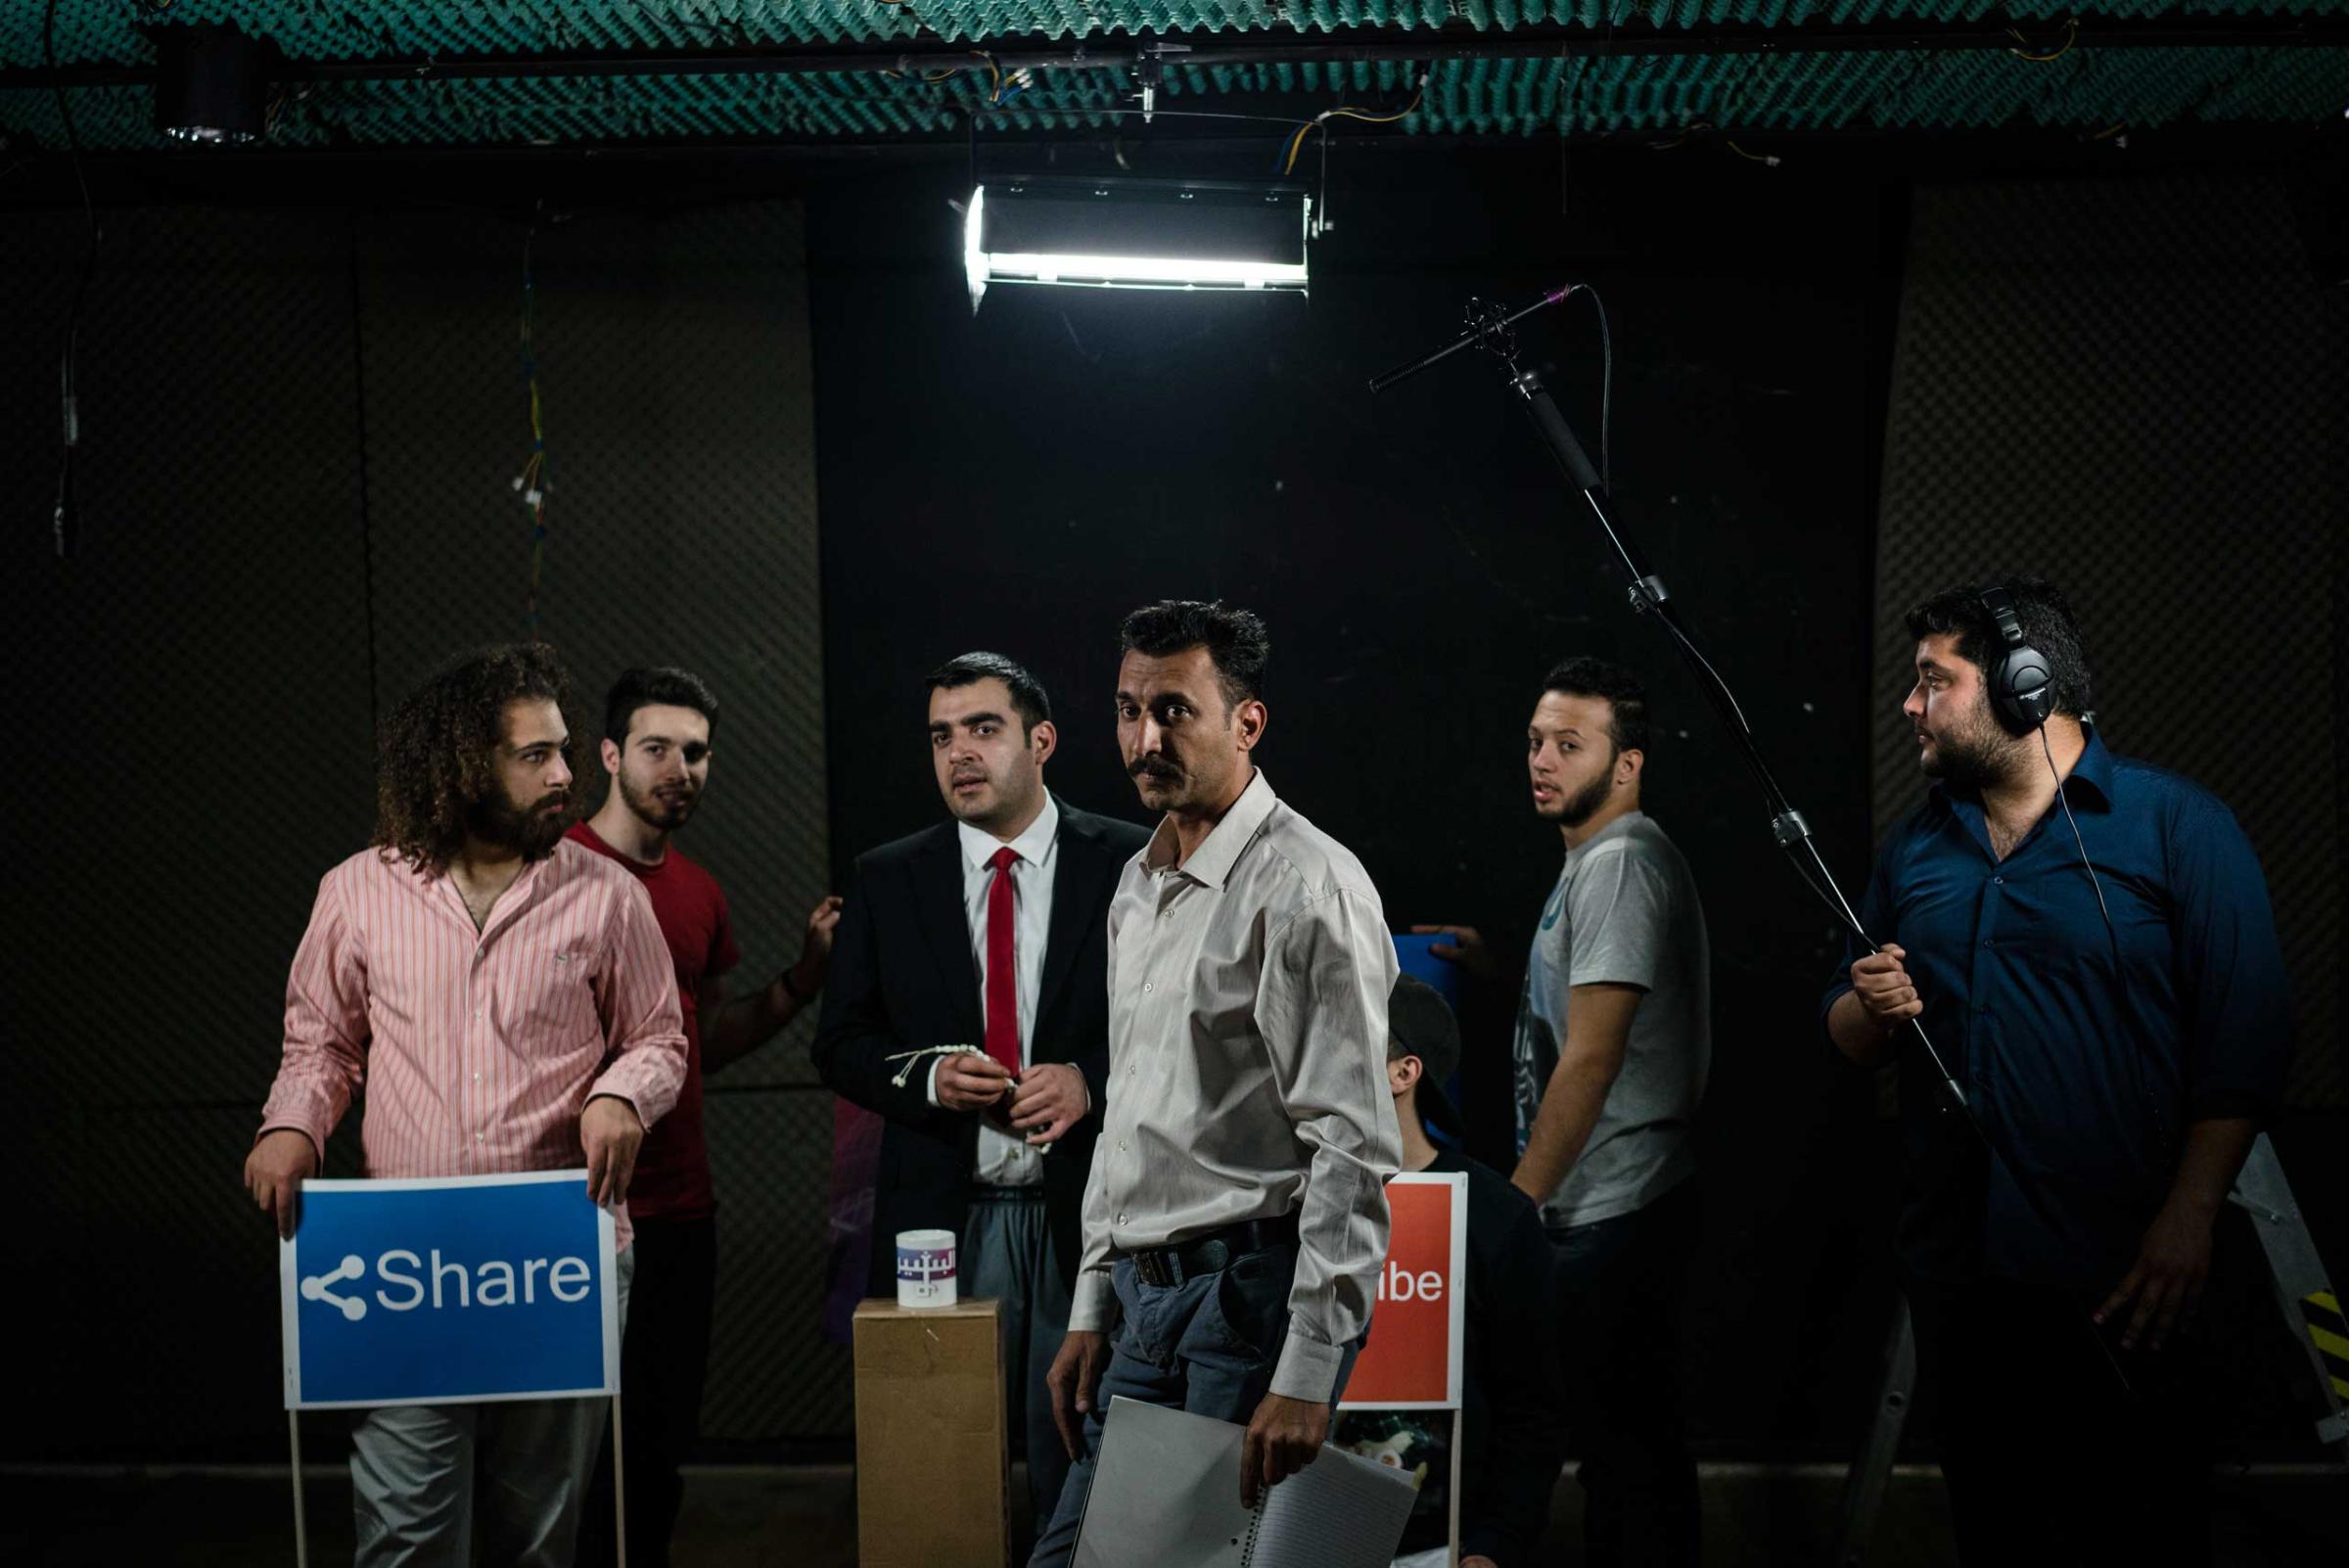 The team at the Al-Basheer show in Amman Jordan, practice scripts, prepare sketches and make dress rehearsals for the airing of the new show in June. From left to right, Alhakam Turki, (red sweatshirt dont kow the name) , Ahmad Al-Basheer, Mustafa Saedi, Yaser Qadir, Faisal Al-Durra